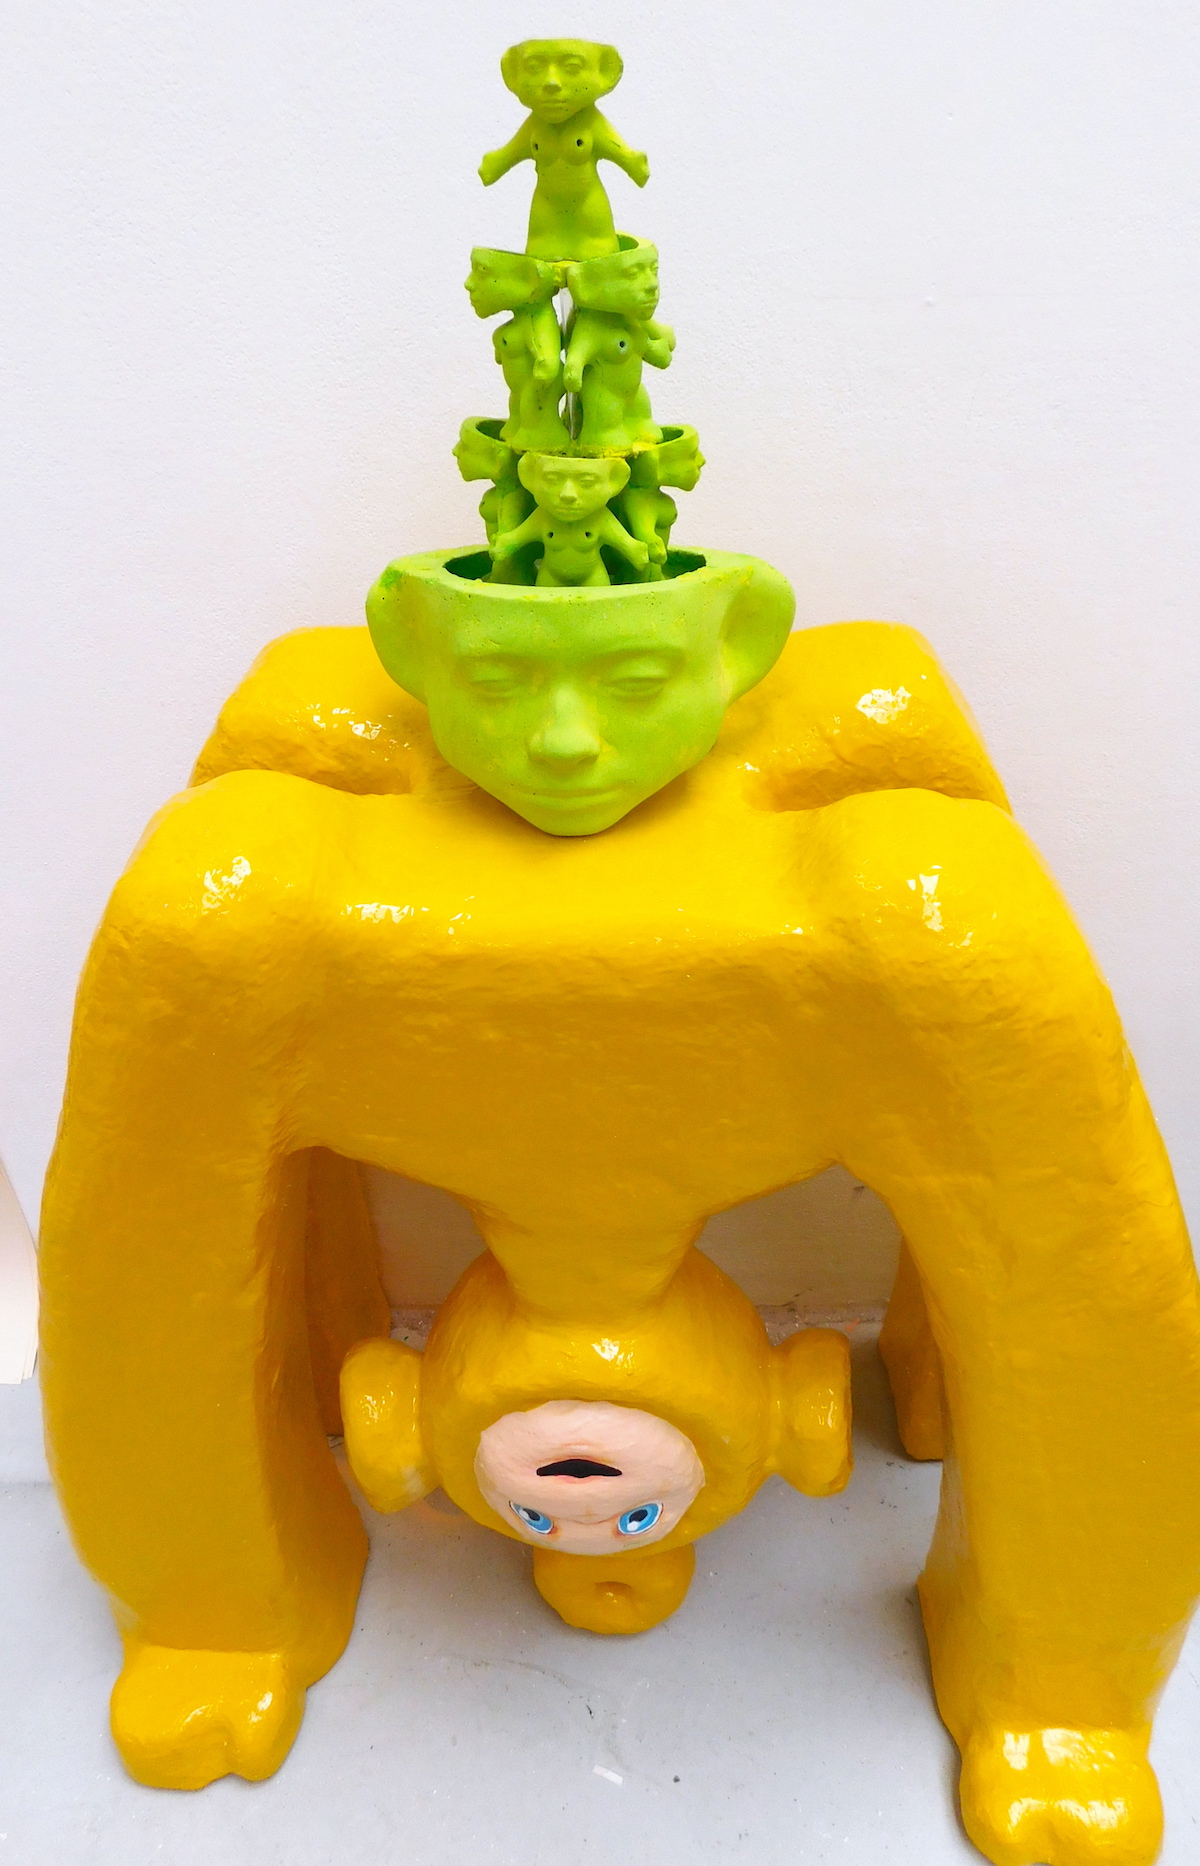 An image of a green stone fountain constructed of trolls sitting on top of a yellow plinth resembling a Teletubby doing a bridge pose. 